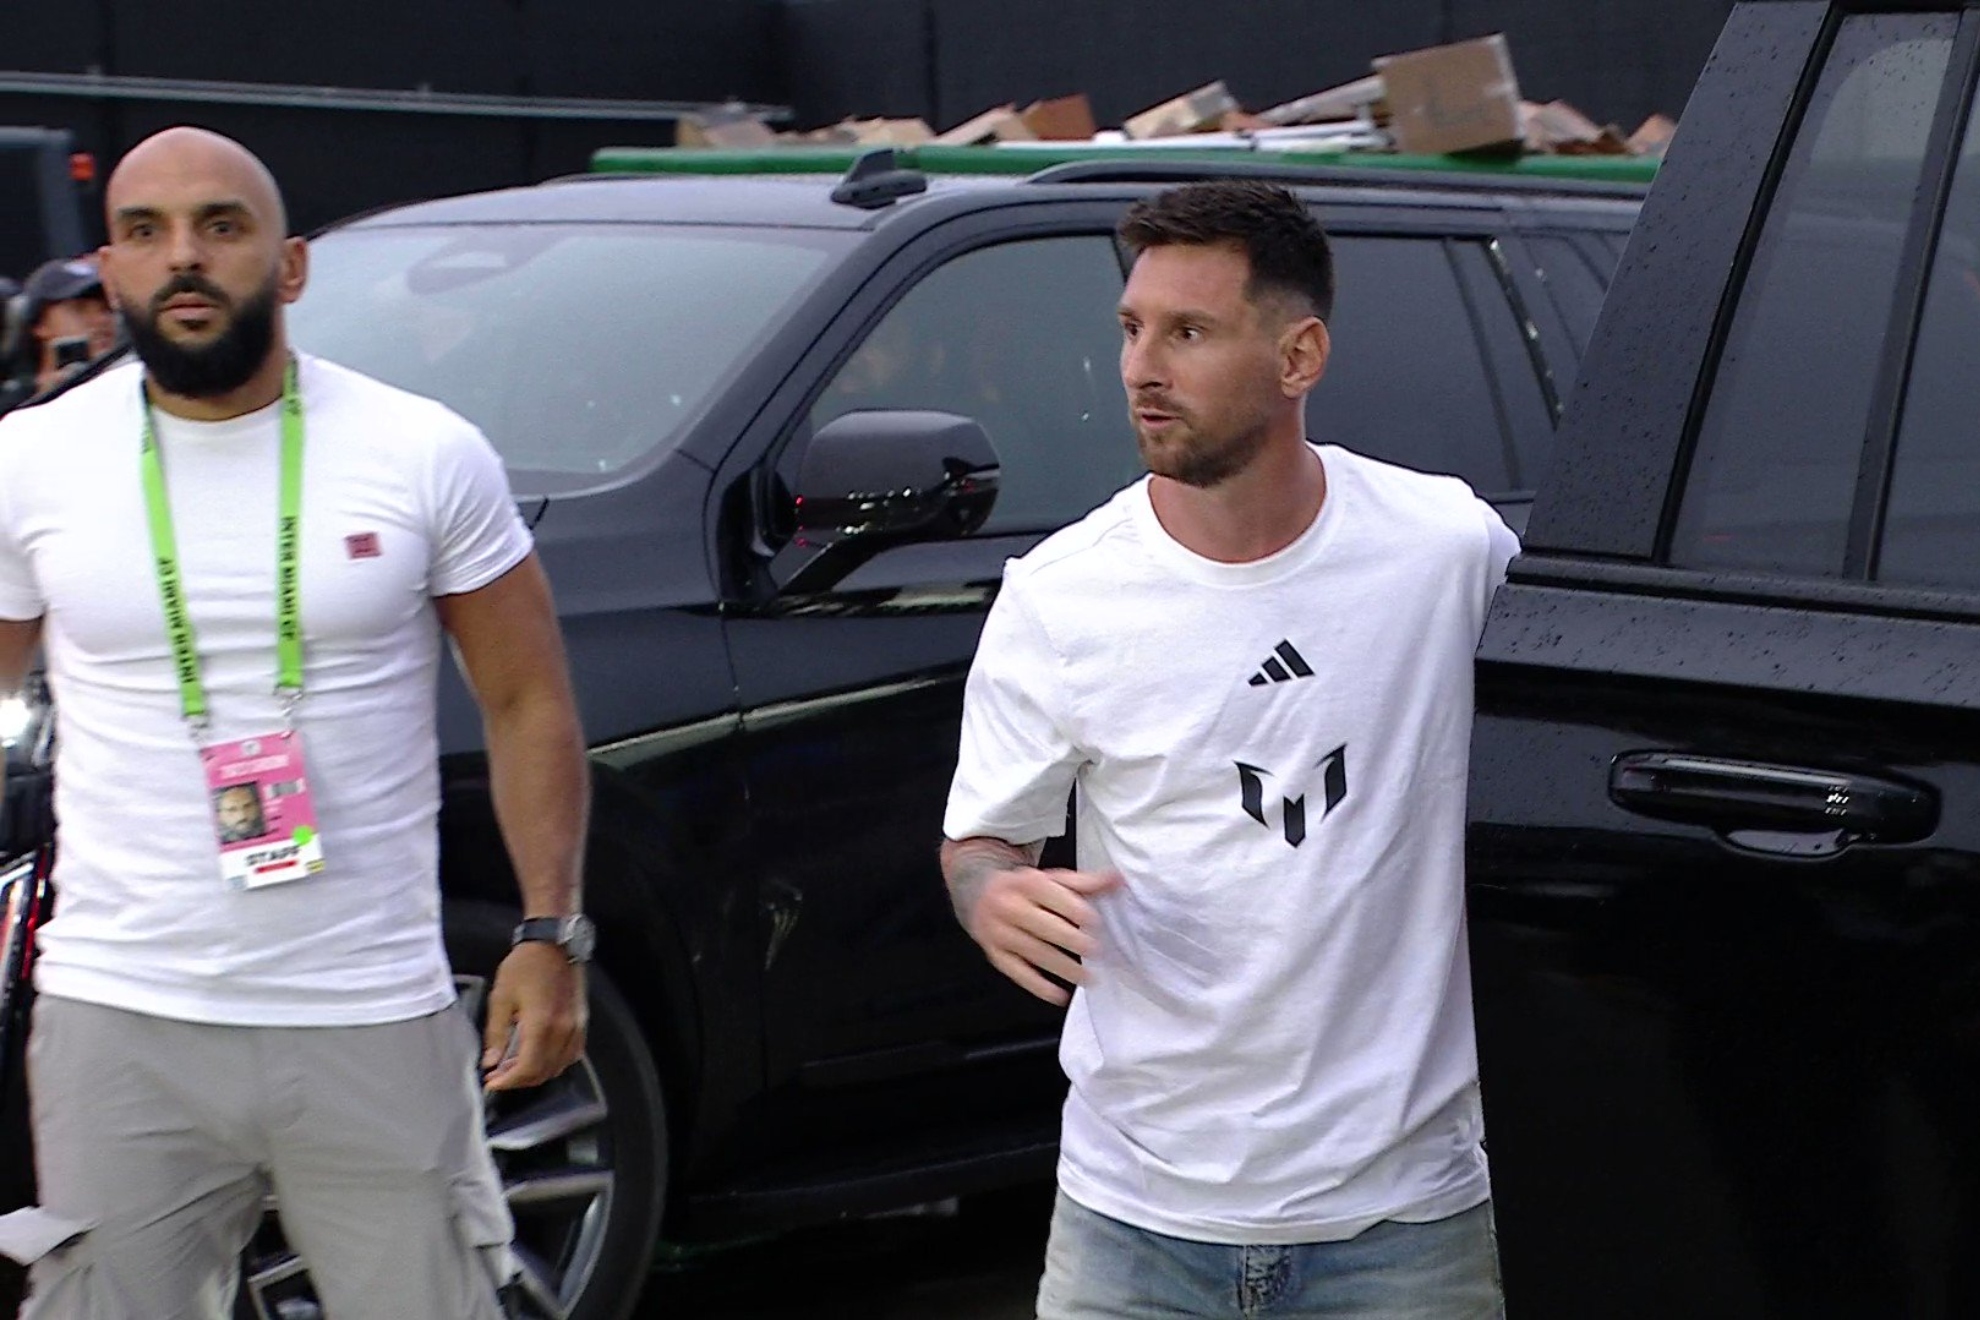 Leo Messi arrived to his new field in full Adidas gear